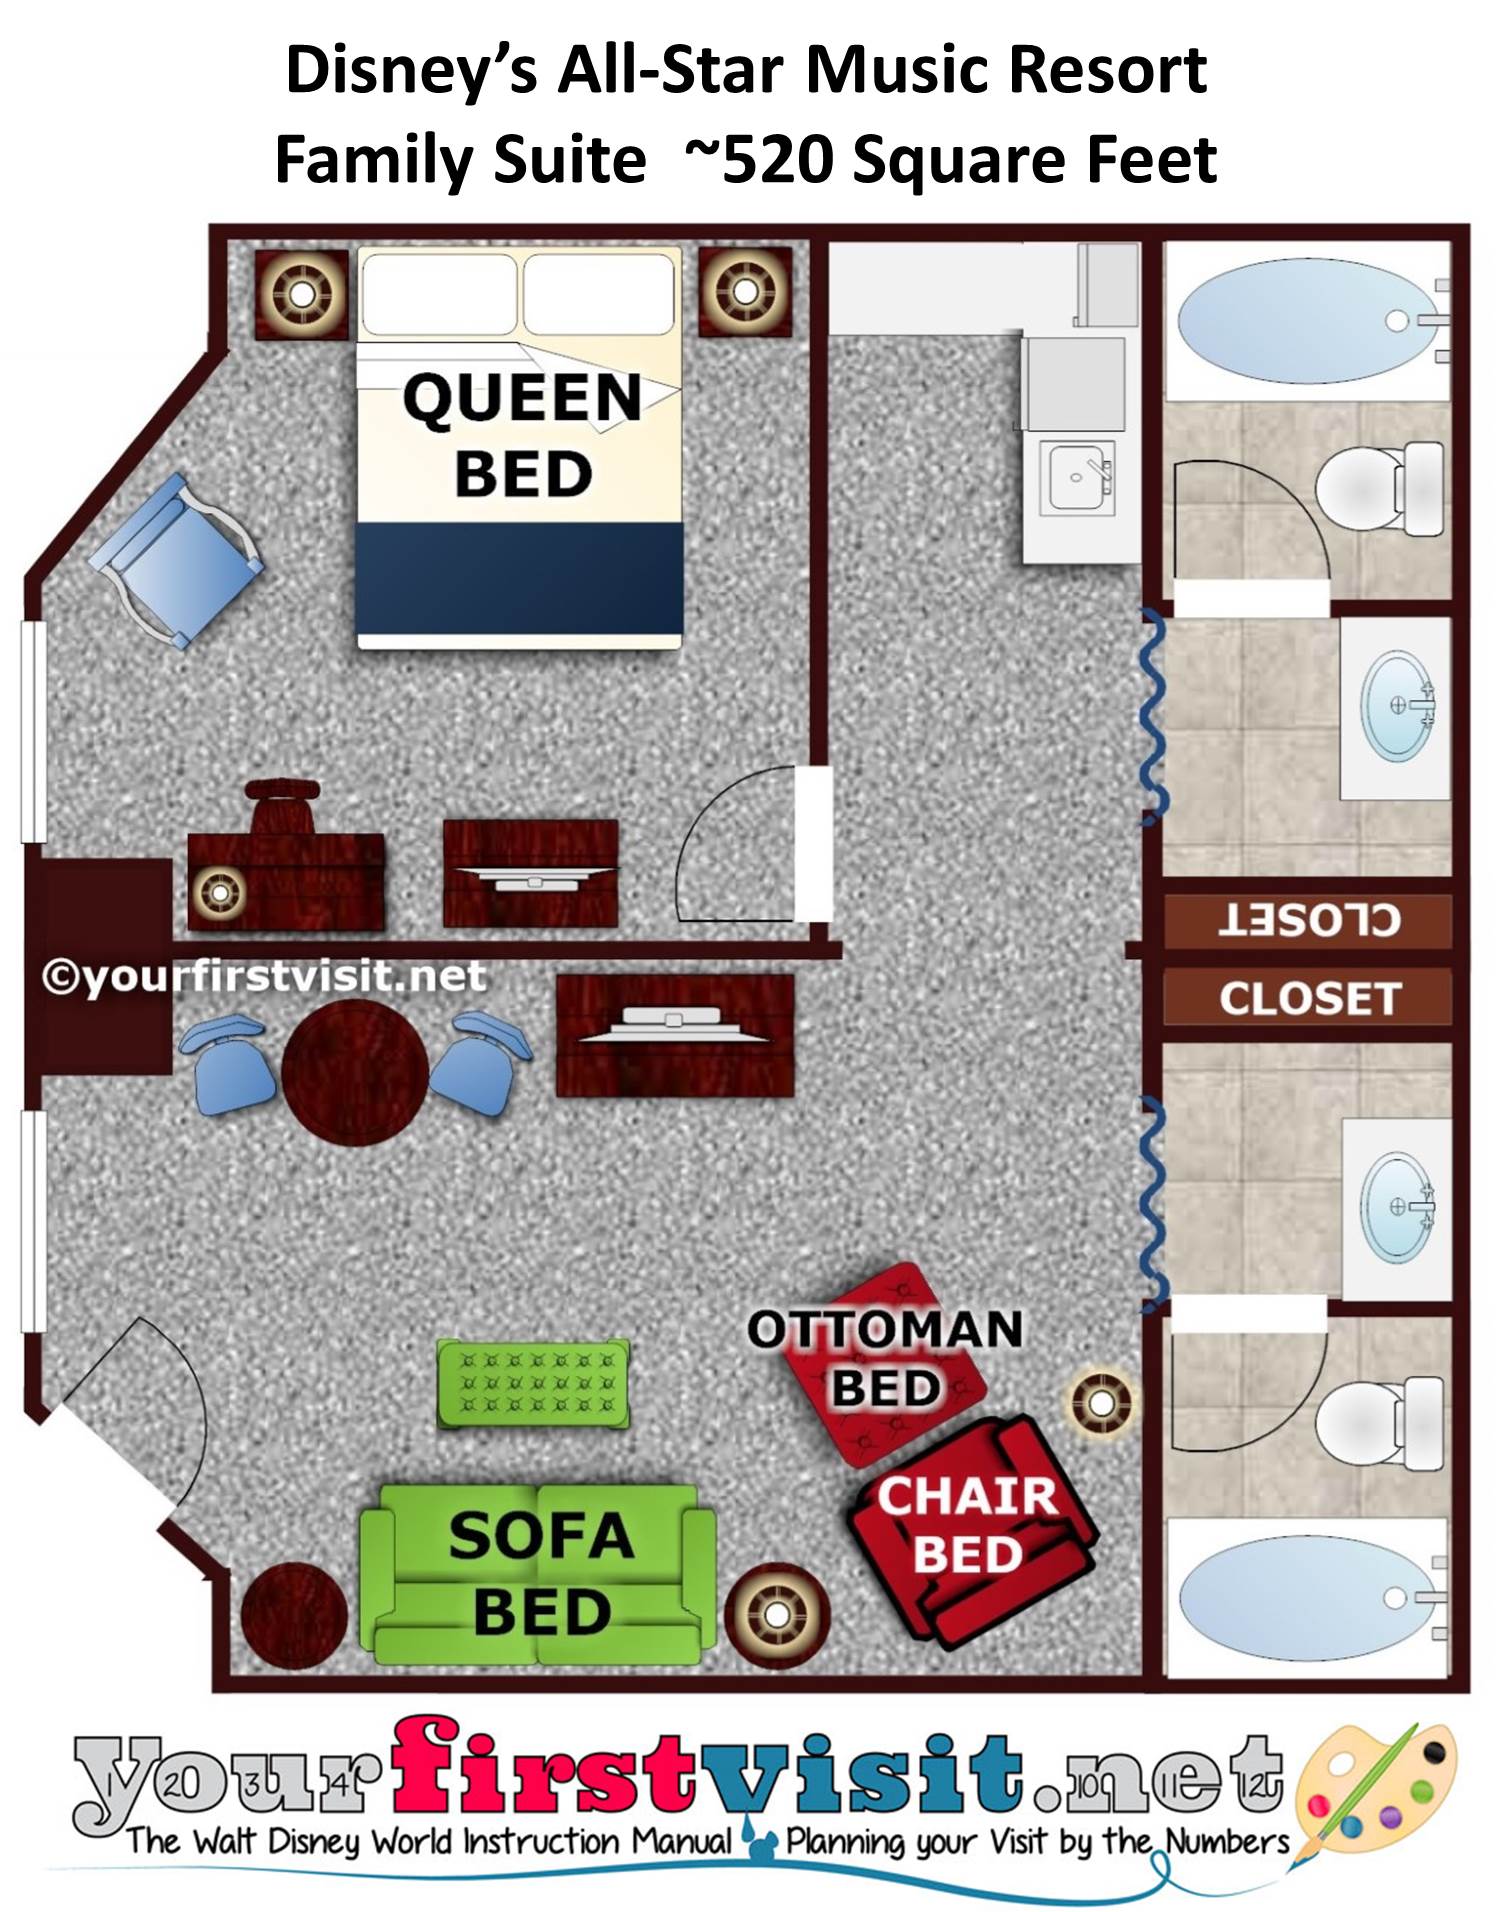 Floor Plan All-Star Music Family Suite from yourfirstvisit.net